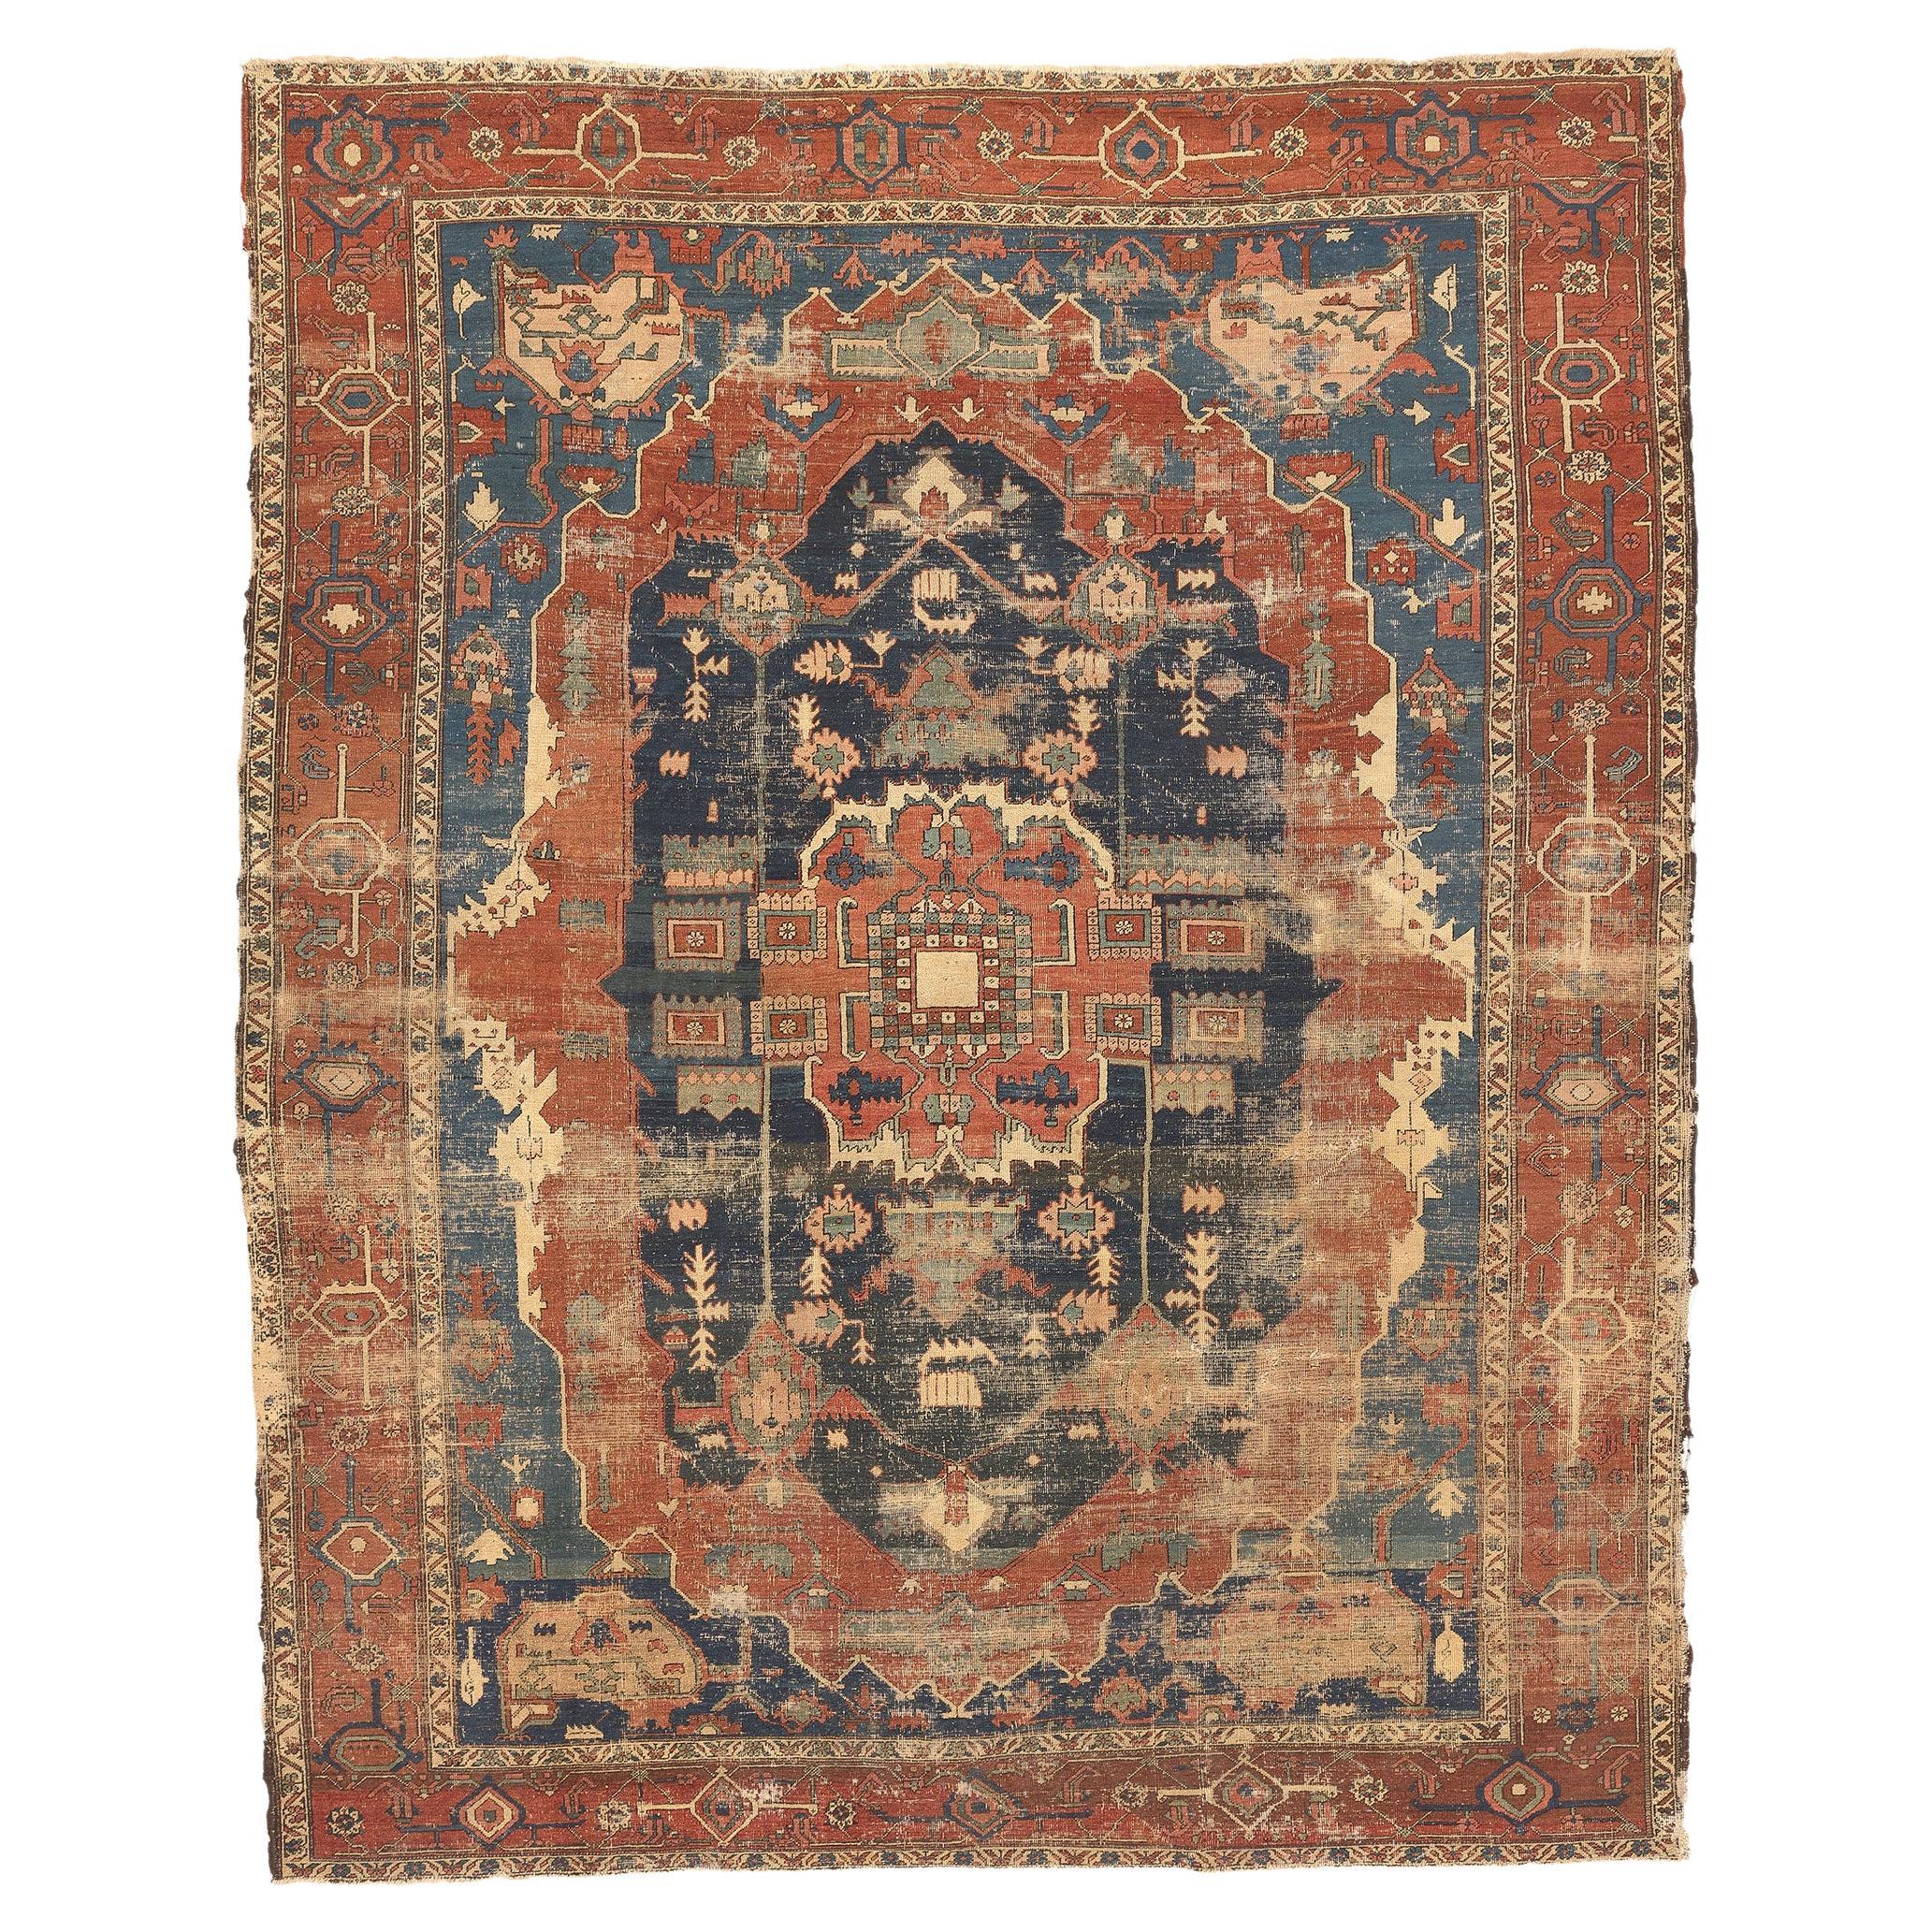 Distressed Antique Persian Serapi Rug, Rugged Beauty Meets Weathered Charm